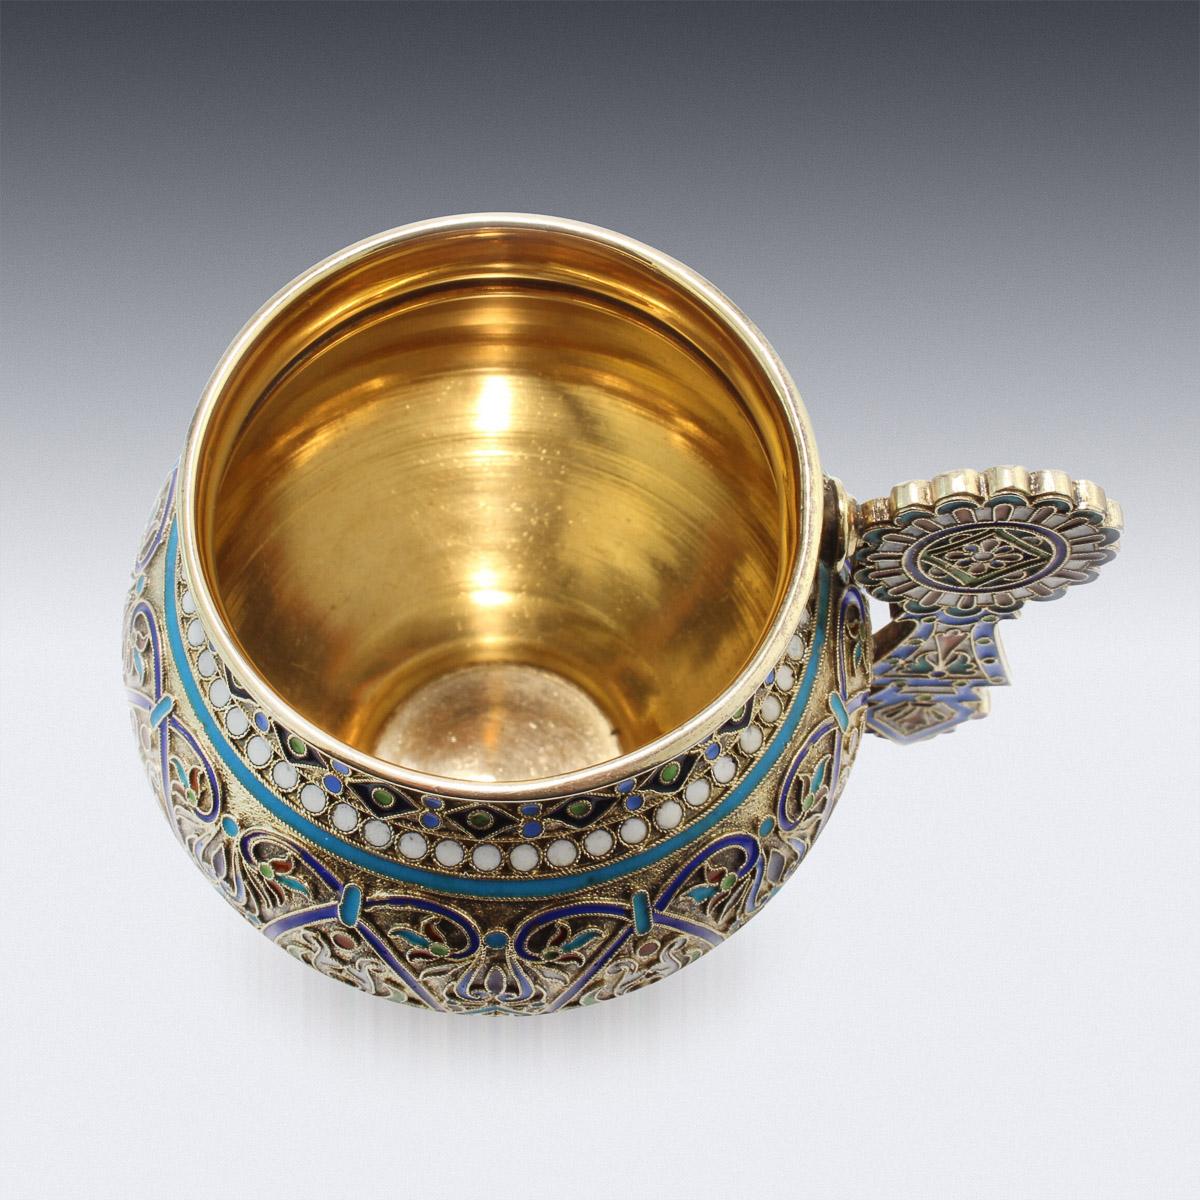 19th Century Imperial Russian Solid Silver-Gilt & Enamel Cup on Saucer, c.1887 1